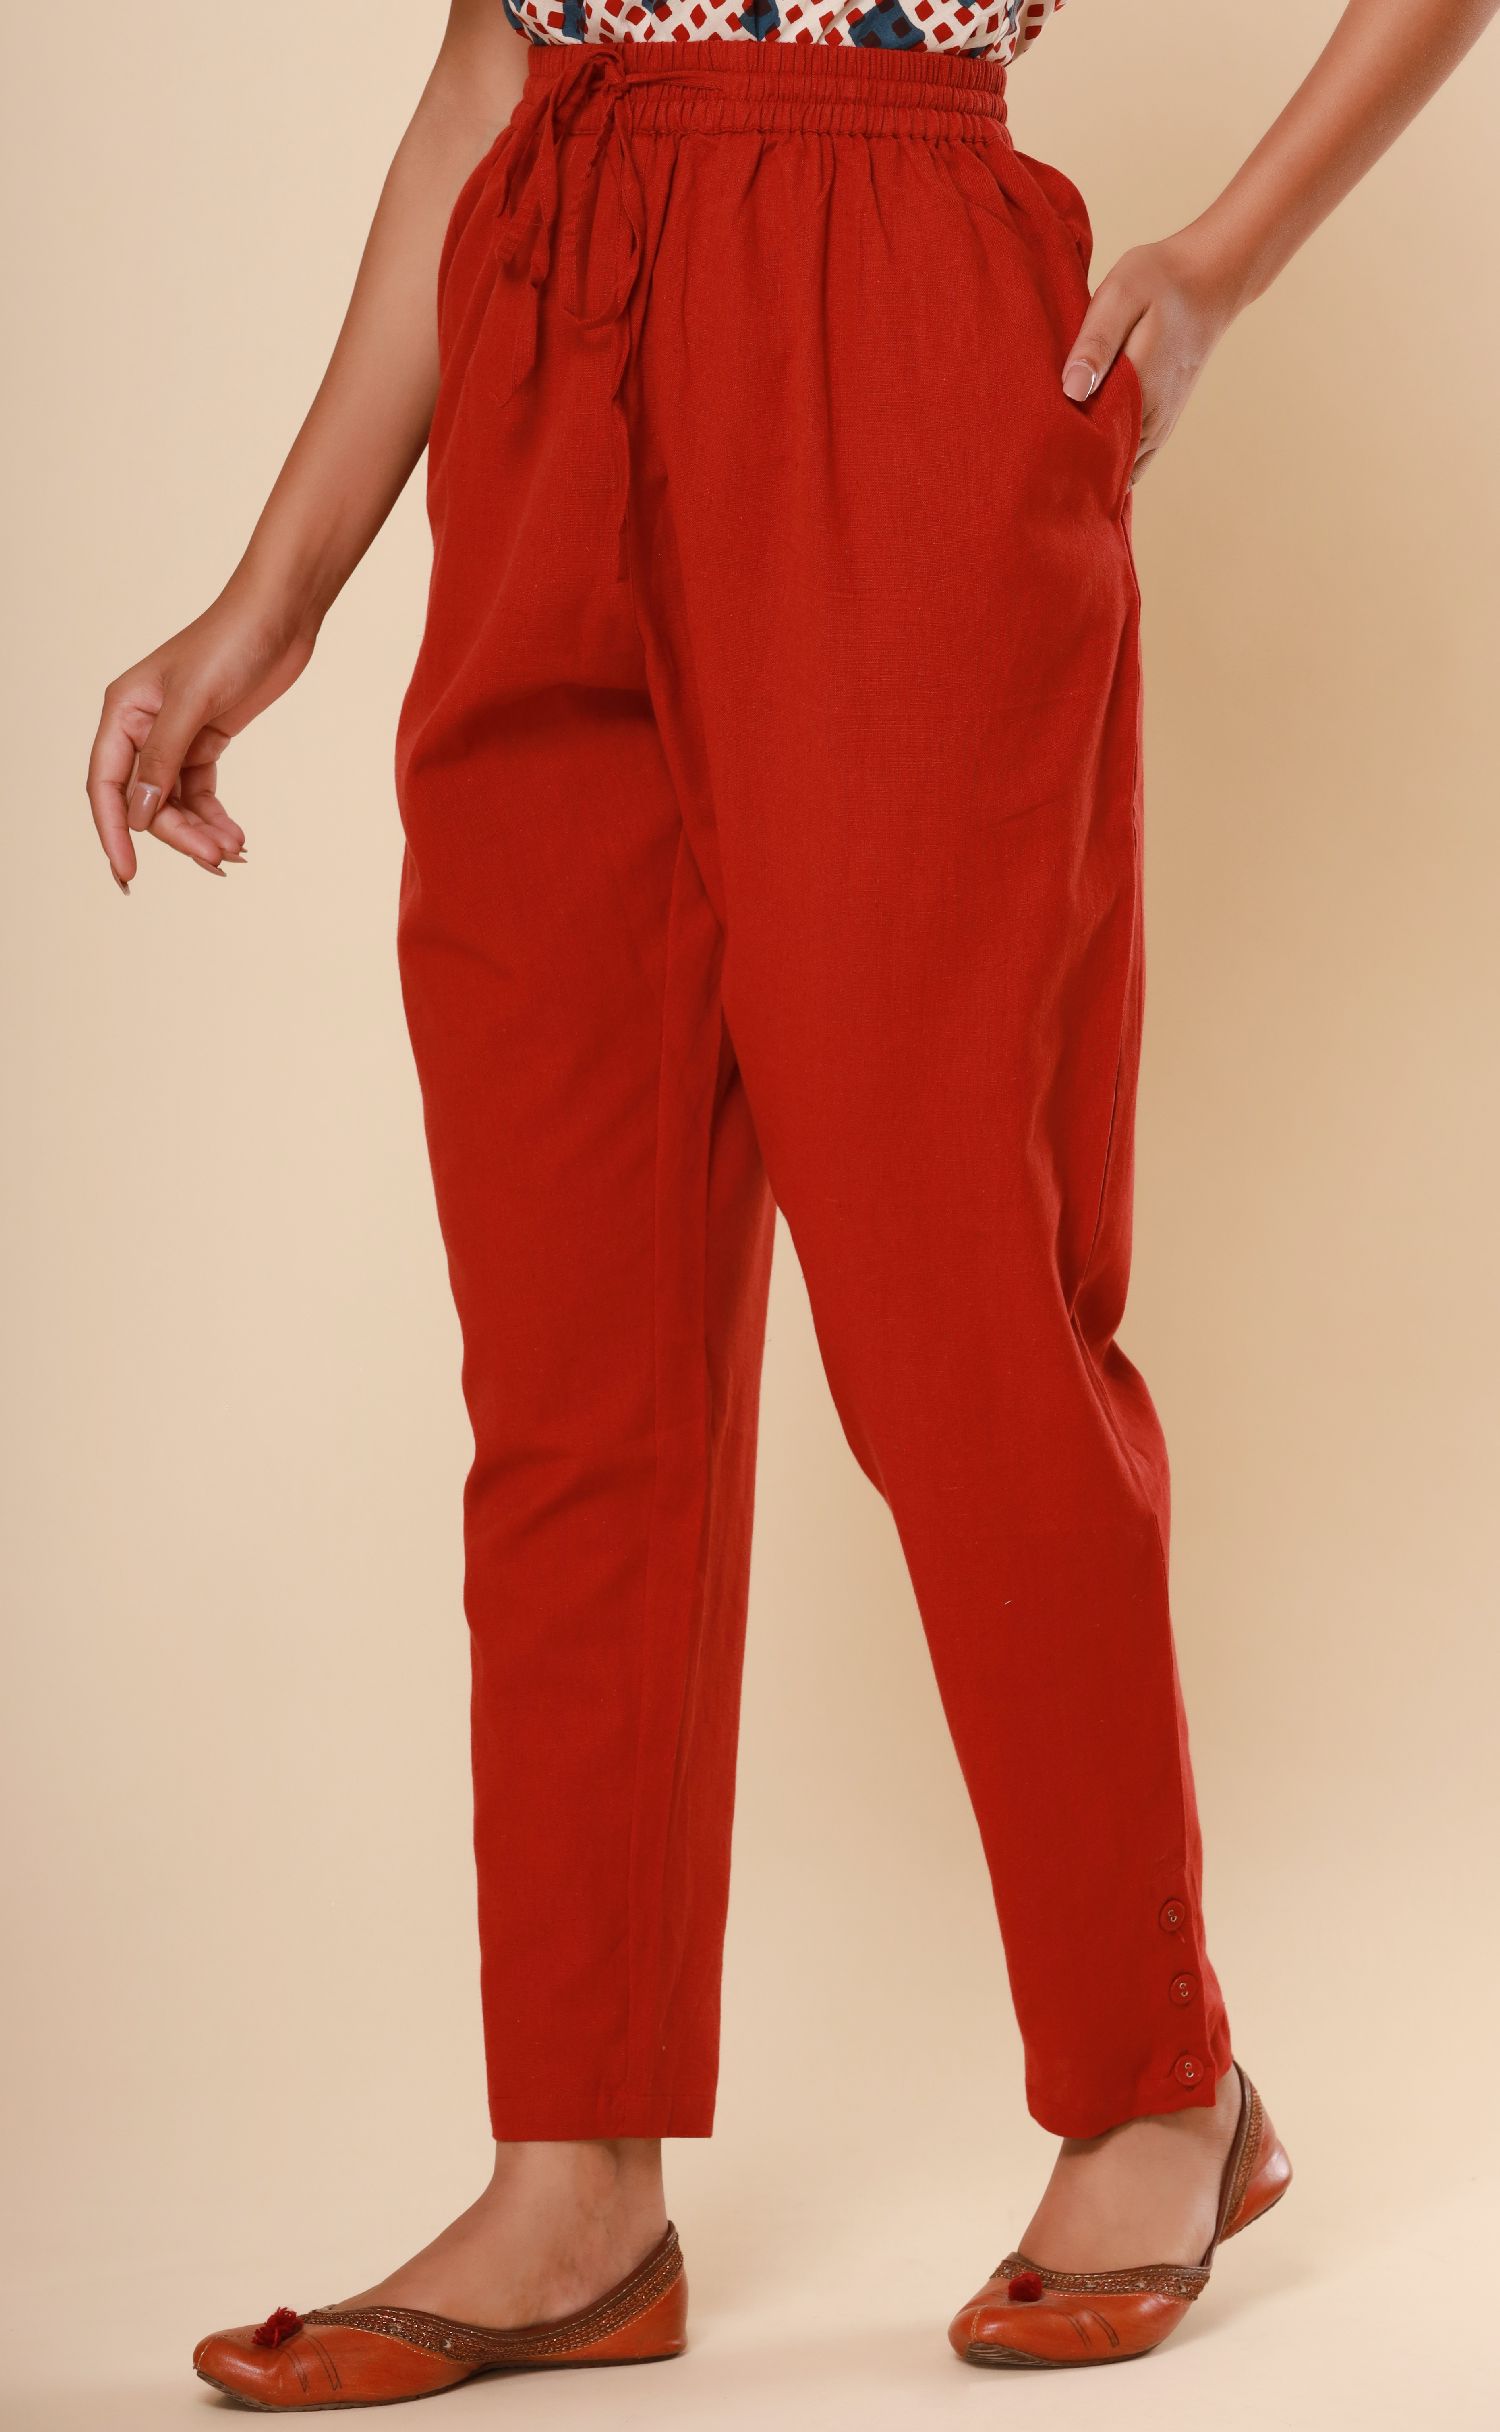 Women's comfortable paperbag trousers